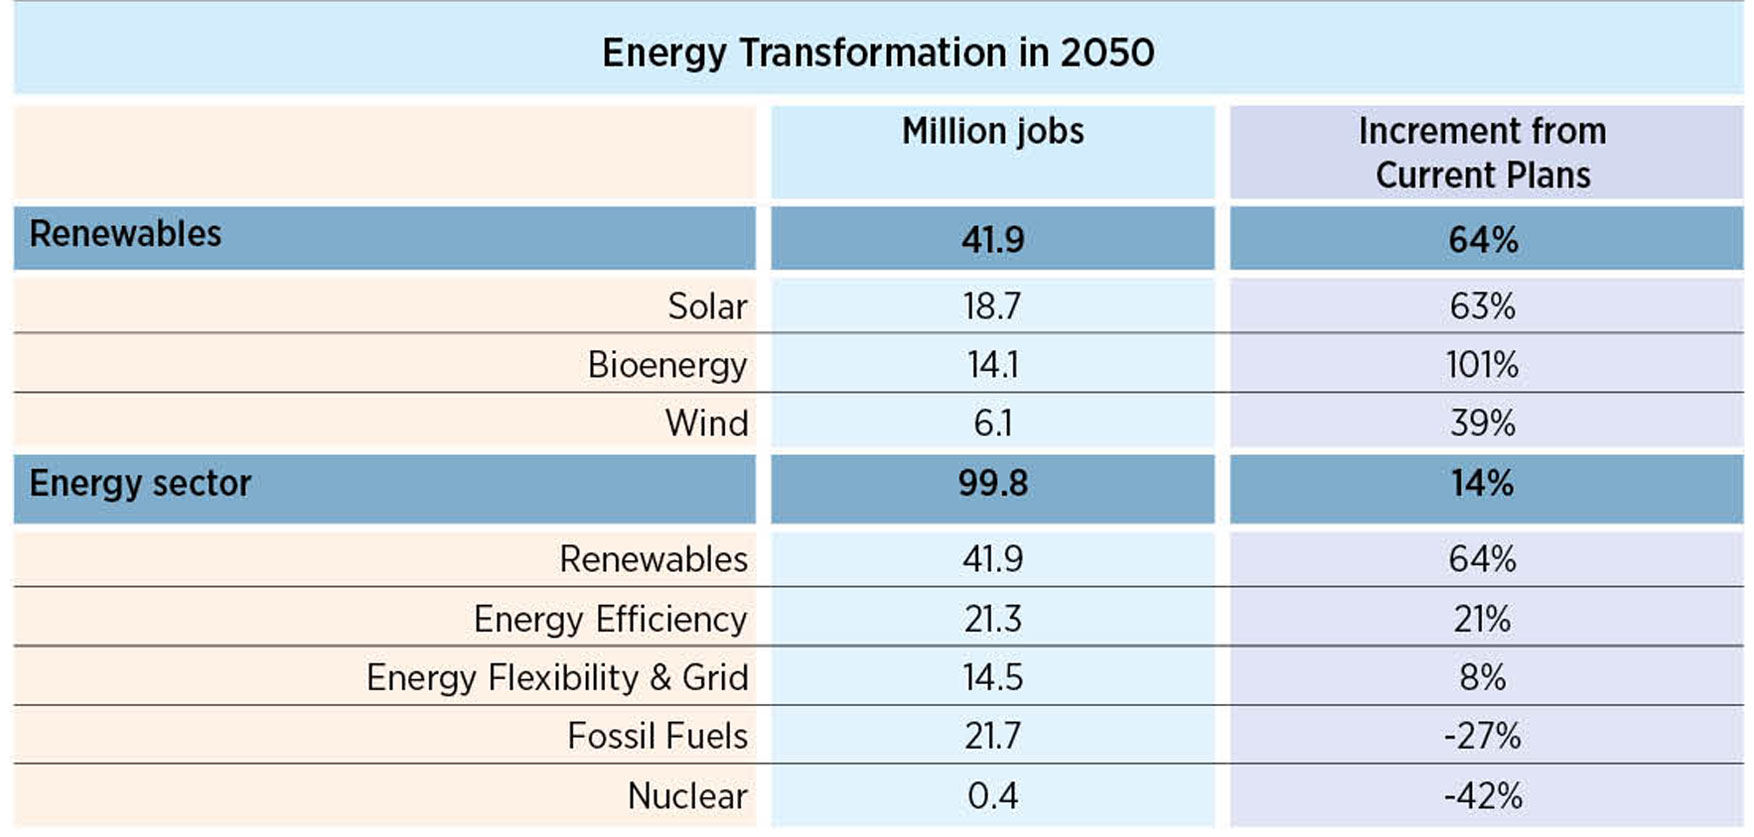 Global renewables and energy sector jobs in 2050 with Energy Transformation